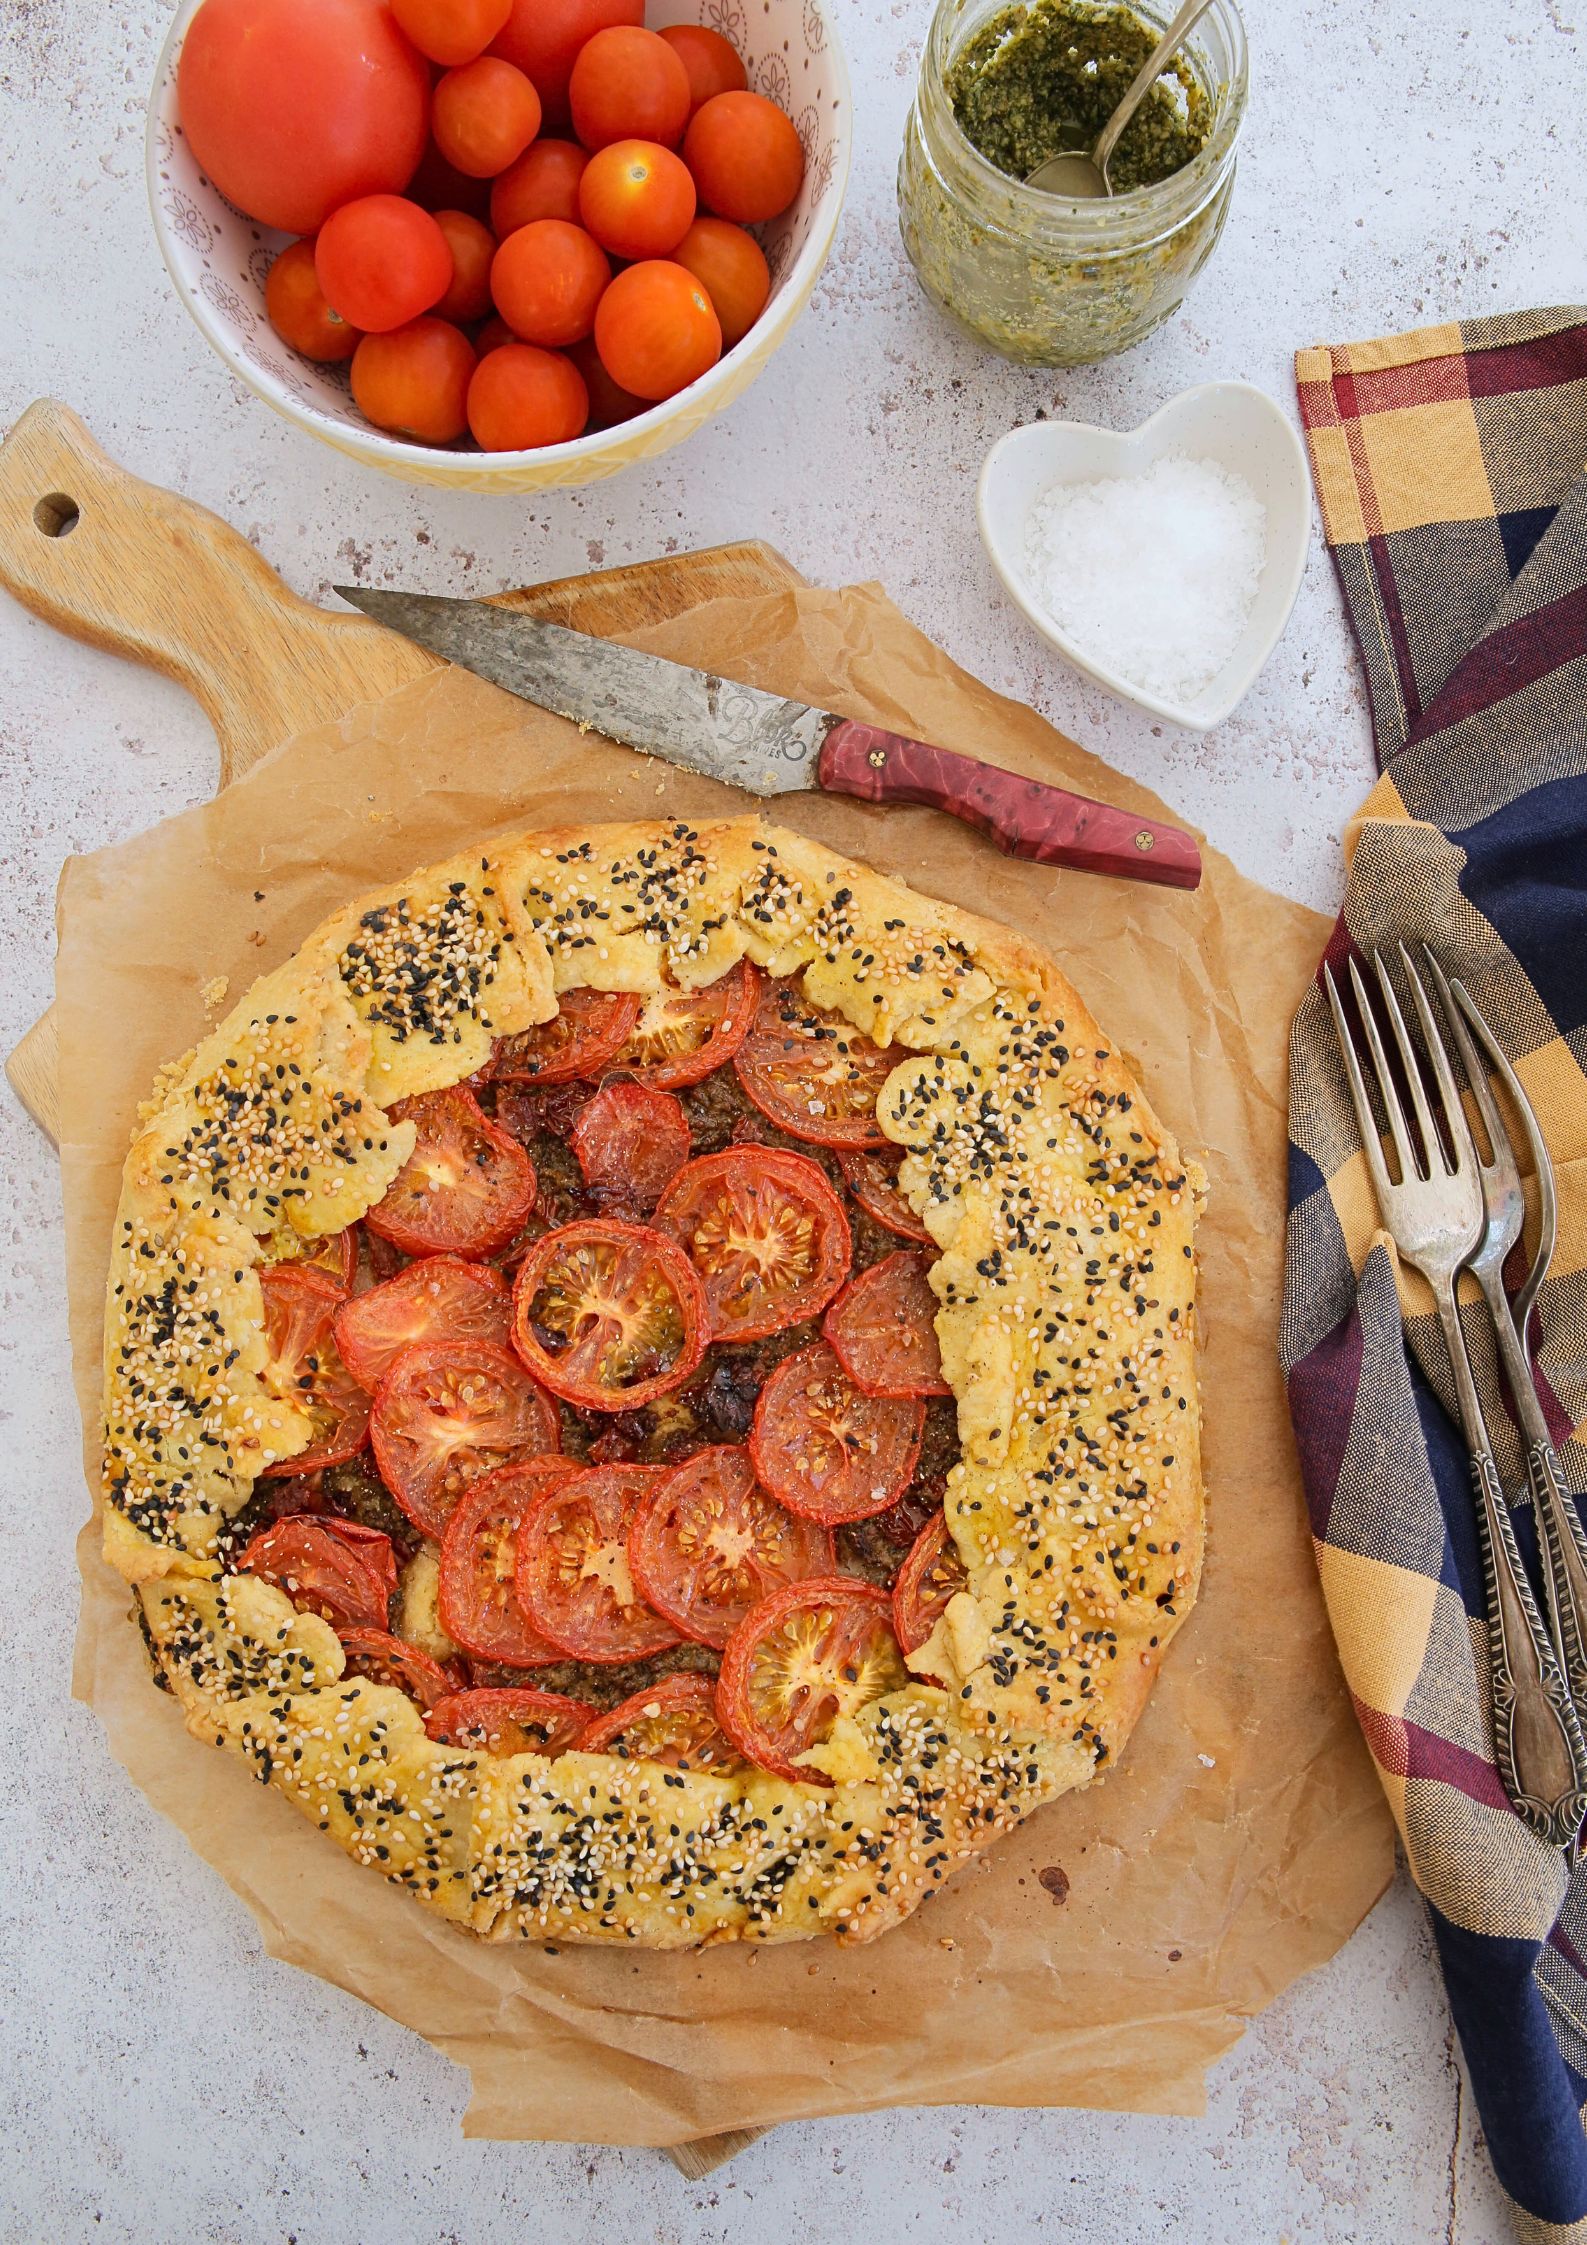 Crisp, flaky, buttery pastry, homemade pesto and sweet summer tomatoes make the perfect rustic tomato galette. This is so simple to put together but SO full of flavour! Recipe on thecookandhim.com | #tomatogalette #tomatotart #easysummerrecipes #tomatoes #tomatorecipes #vegan #pesto